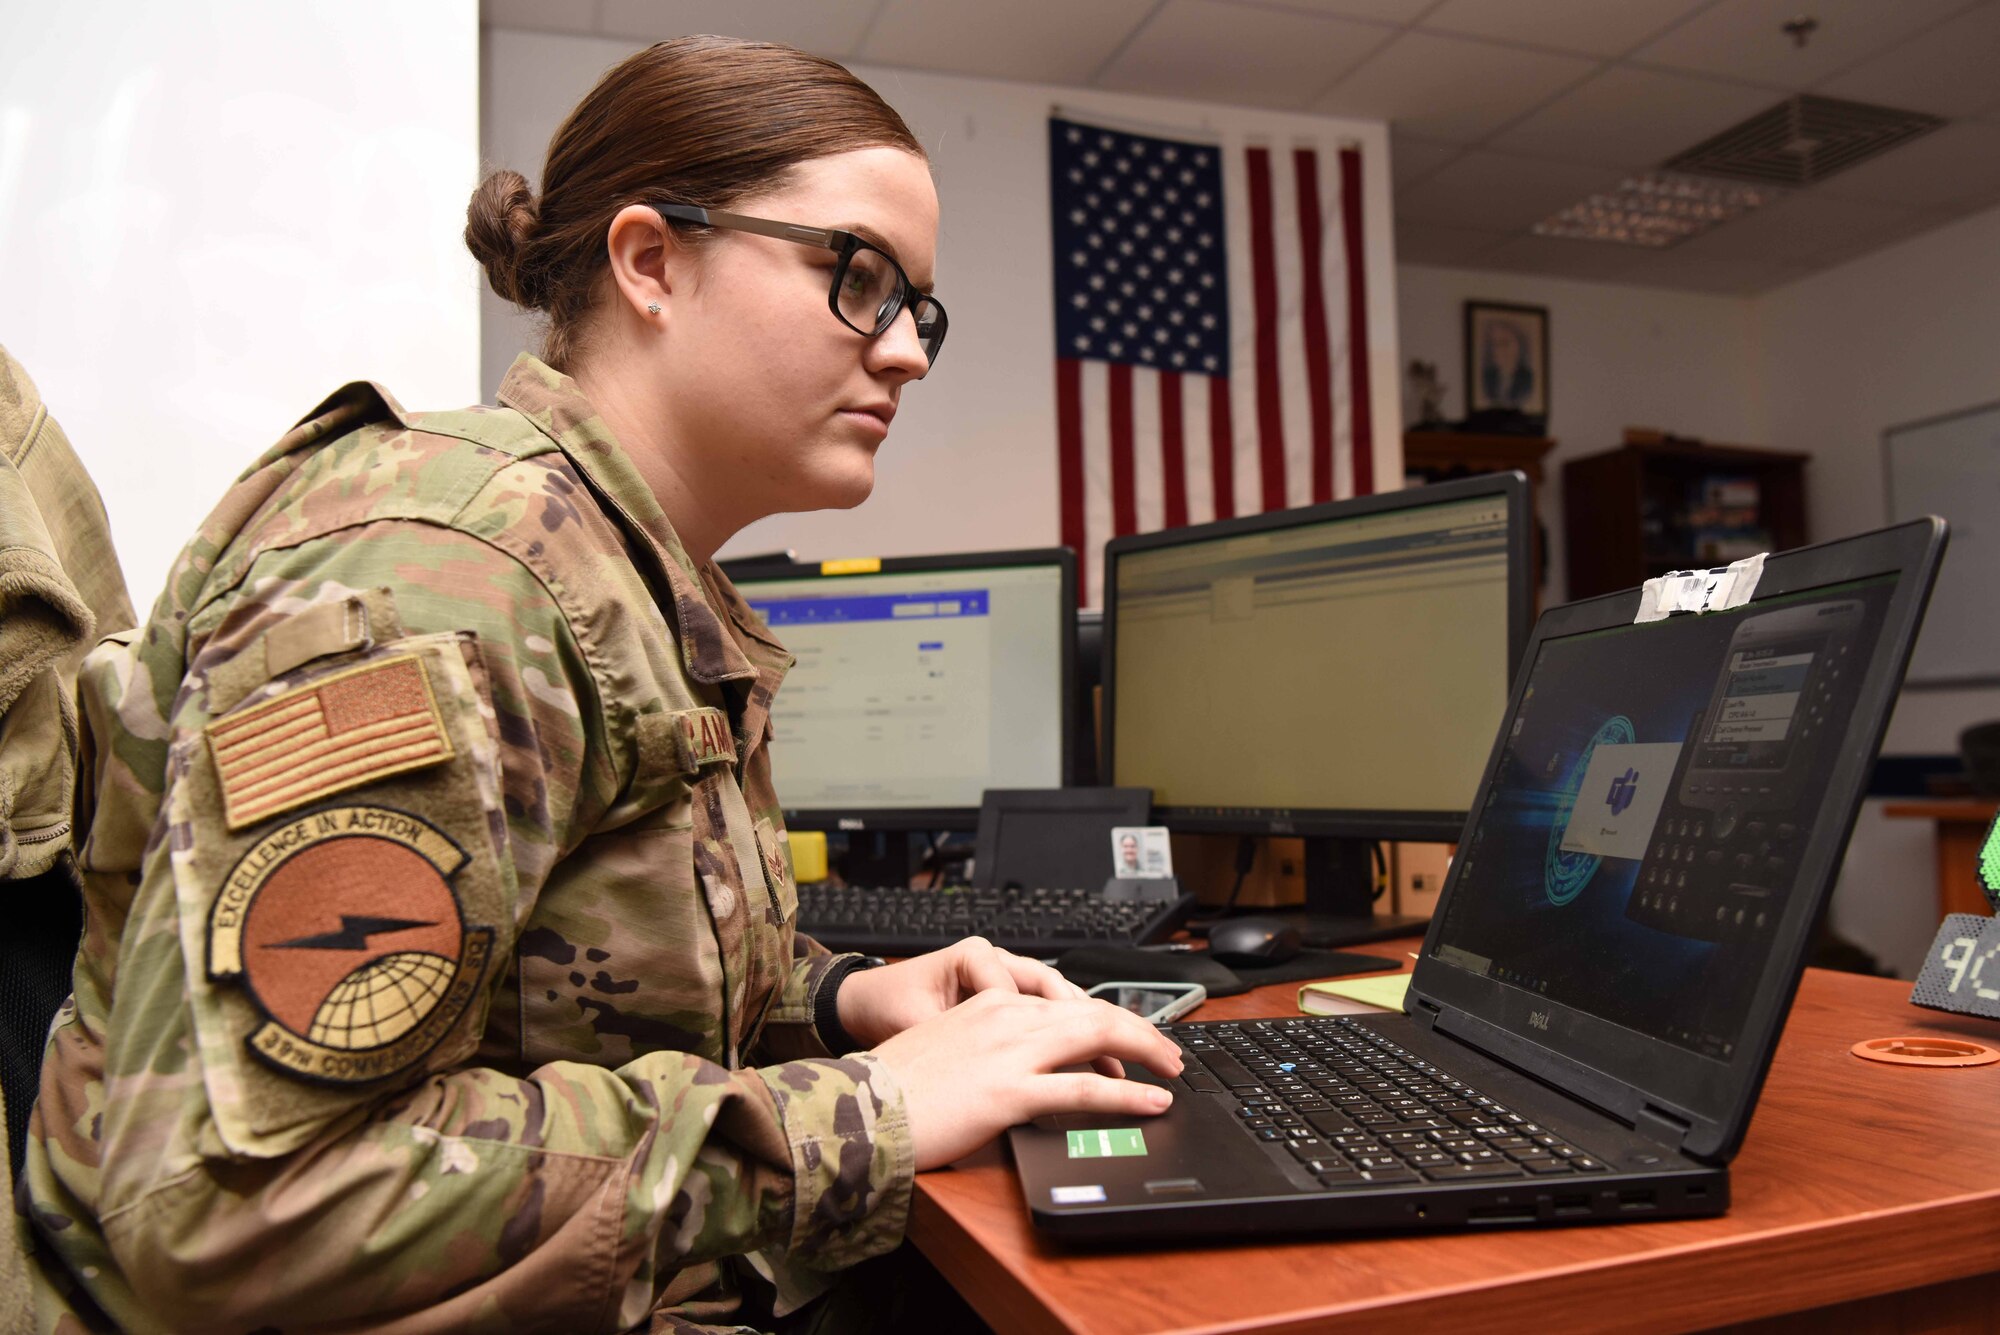 Photo of Airman typing on a computer